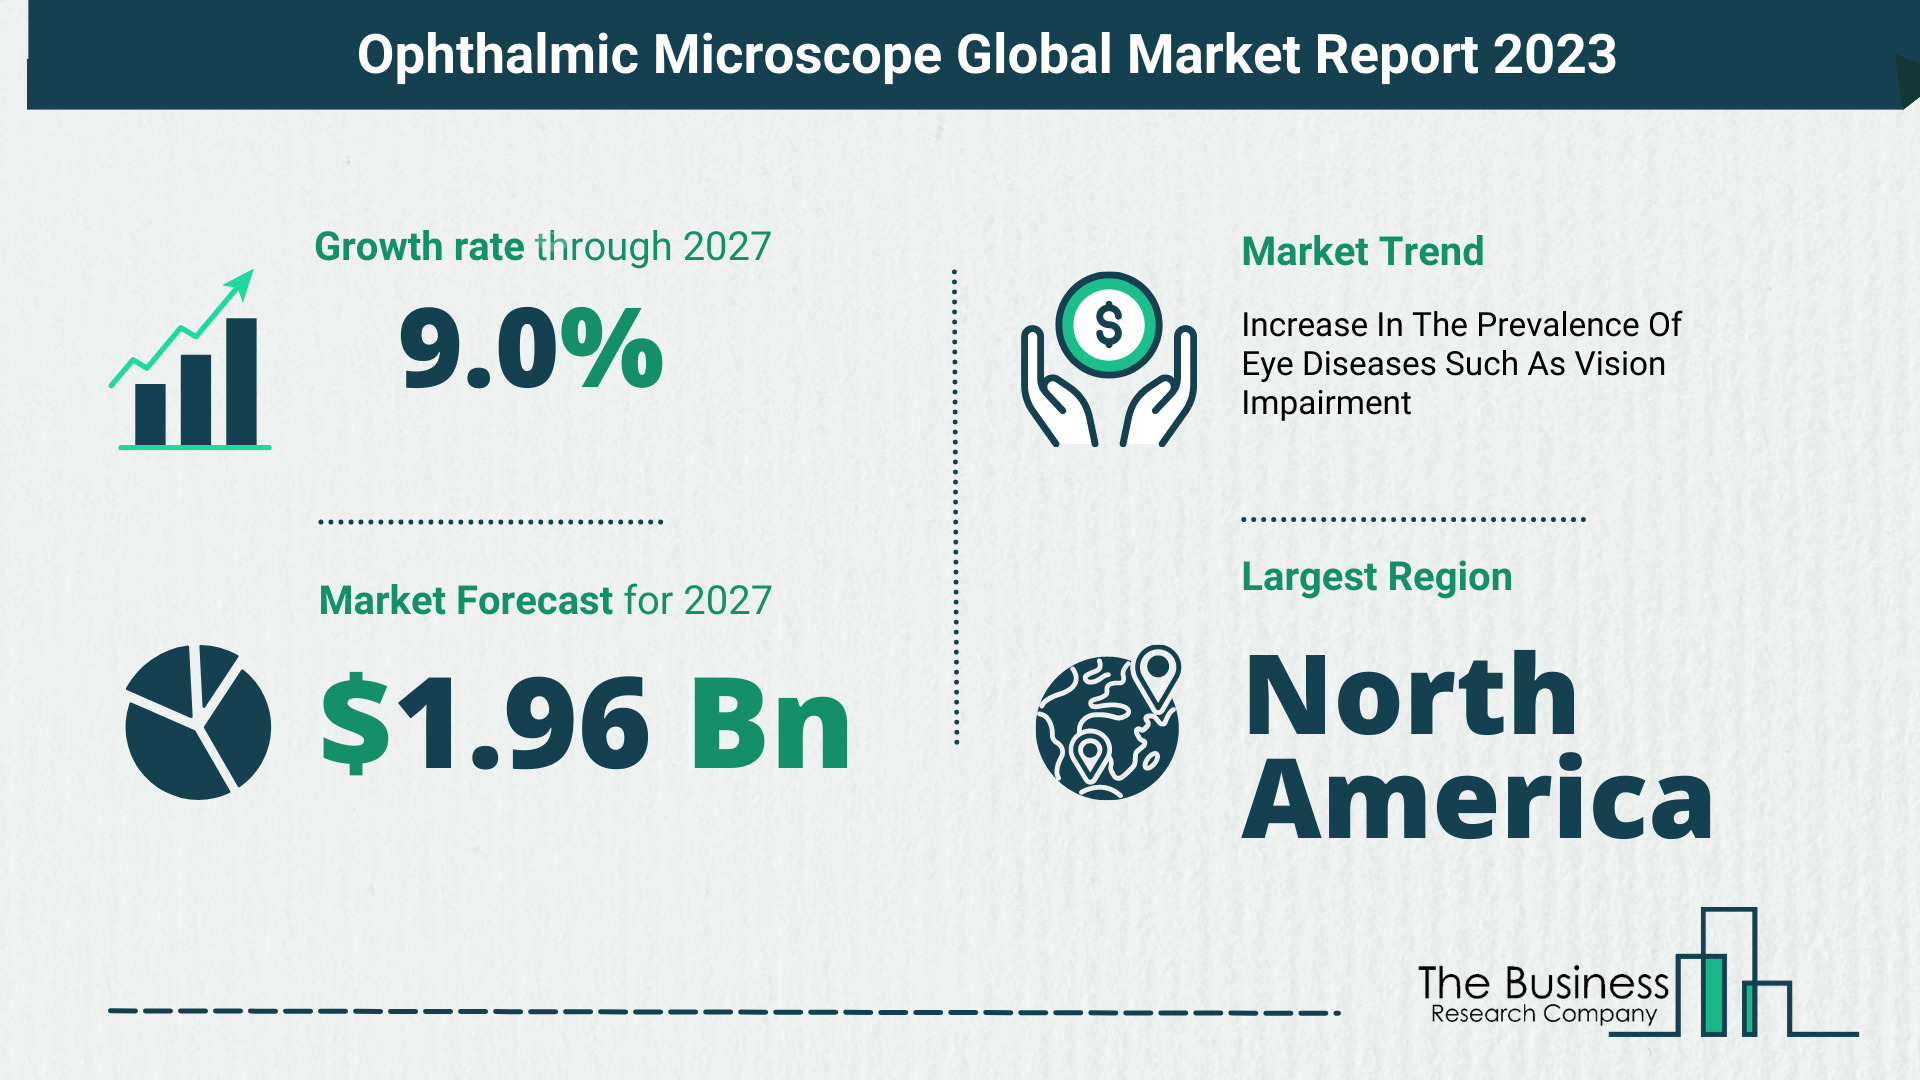 Global Ophthalmic Microscope Market Opportunities And Strategies 2023